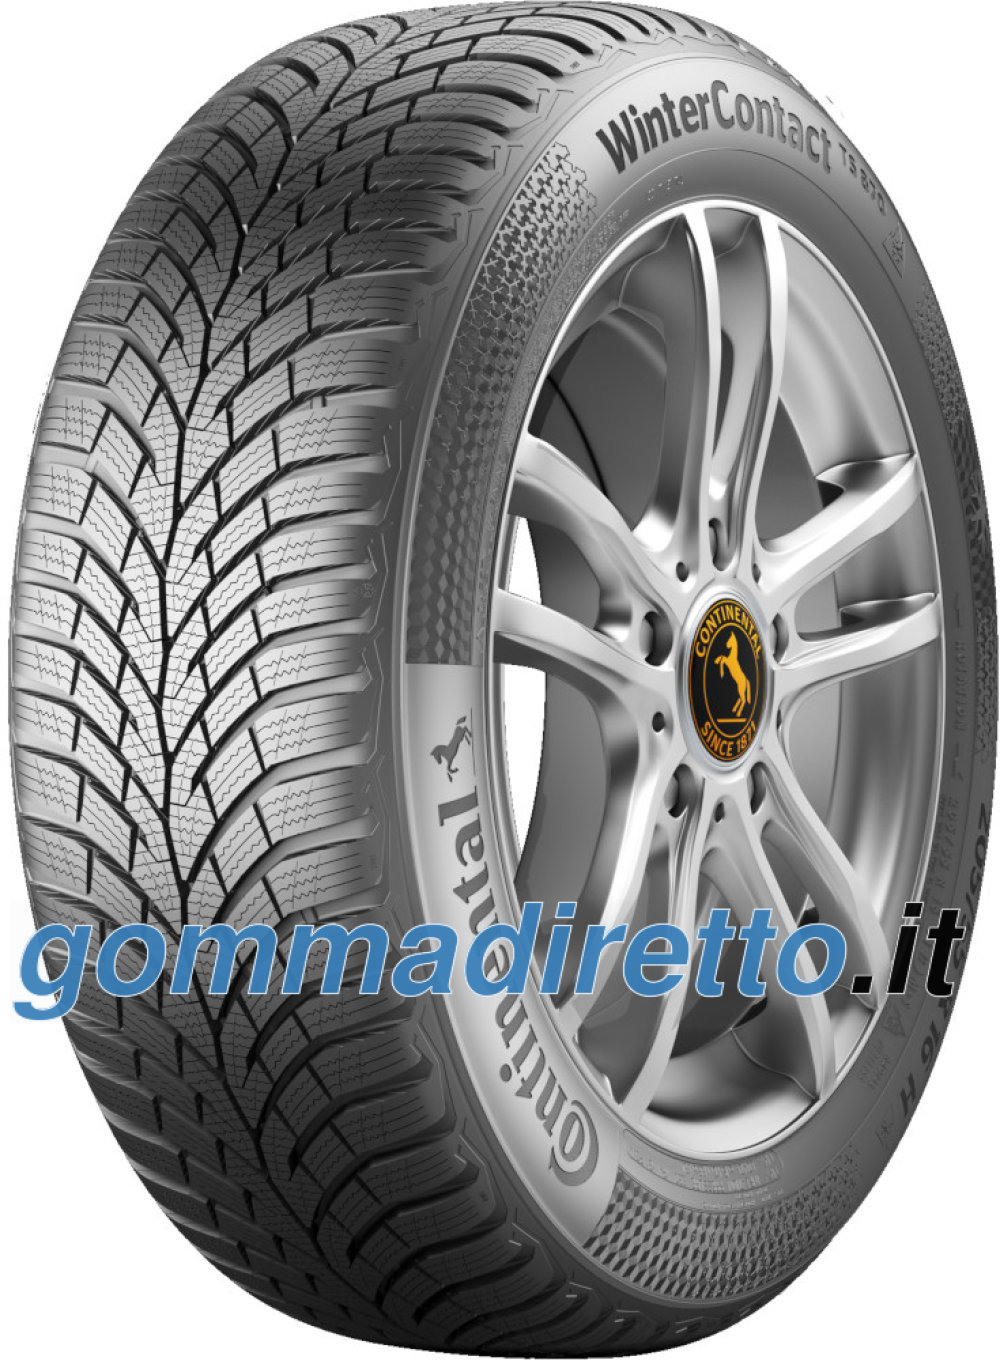 Image of Continental WinterContact TS 870 ( 215/60 R16 99H XL EVc )